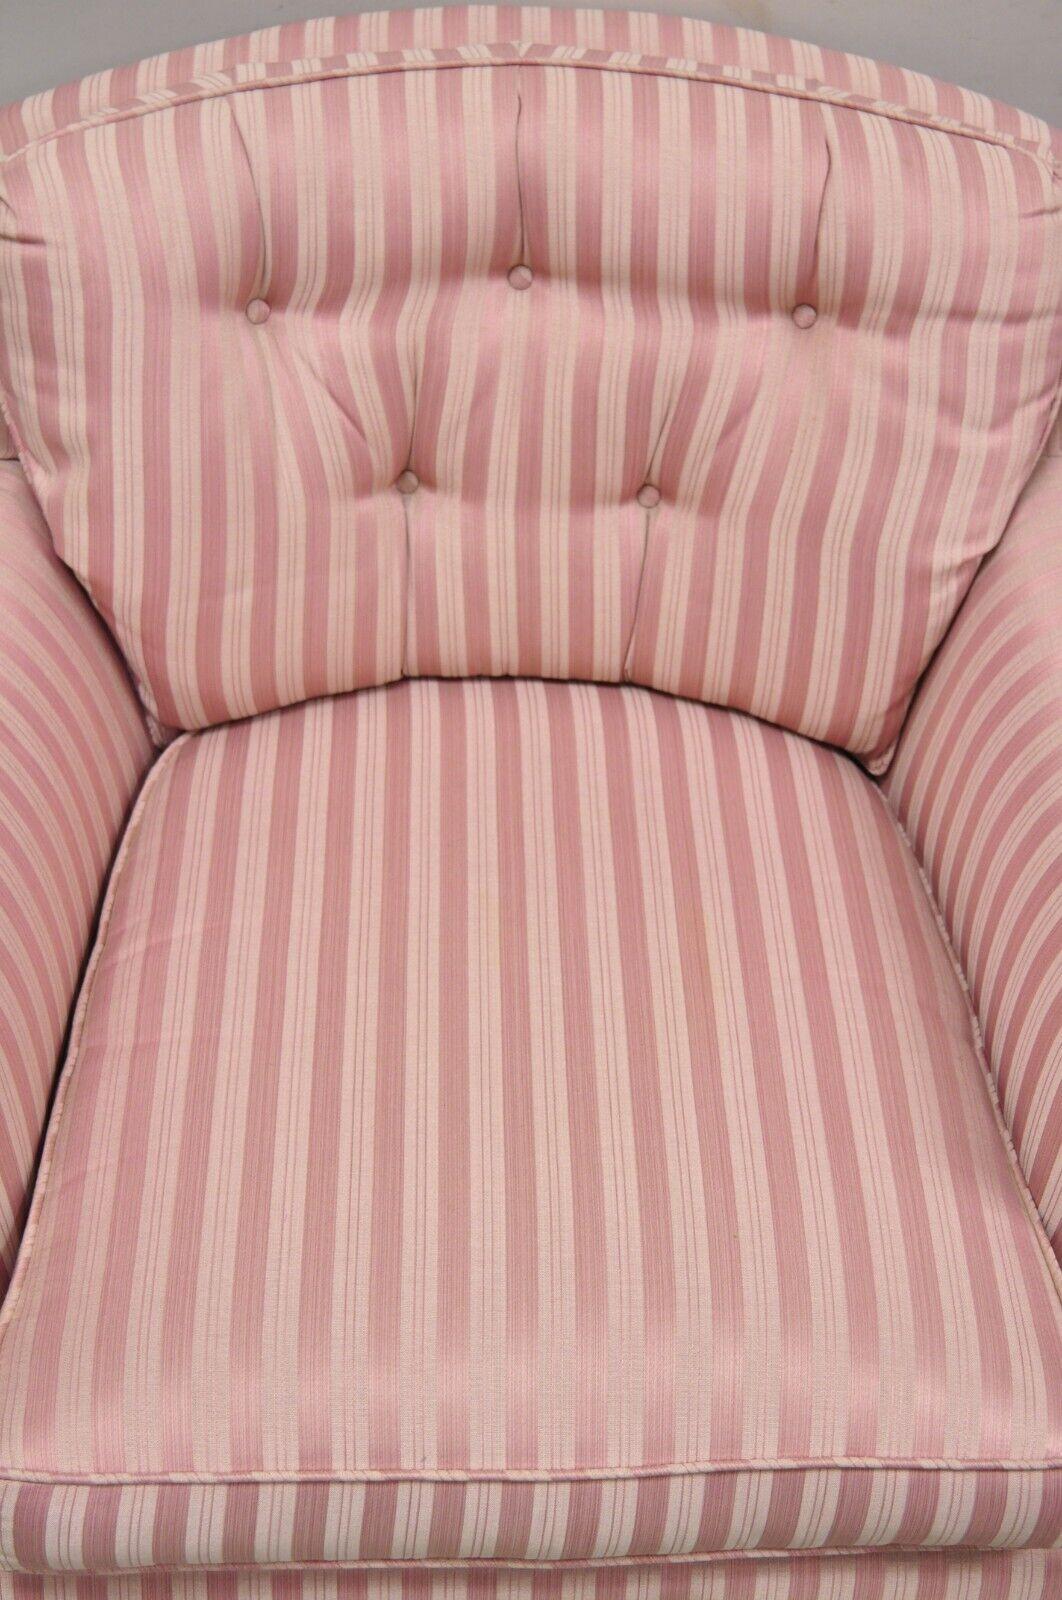 Fabric Pair Vintage Custom Pink Candy Stripe Upholstered Swivel Tilt Club Lounge Chairs